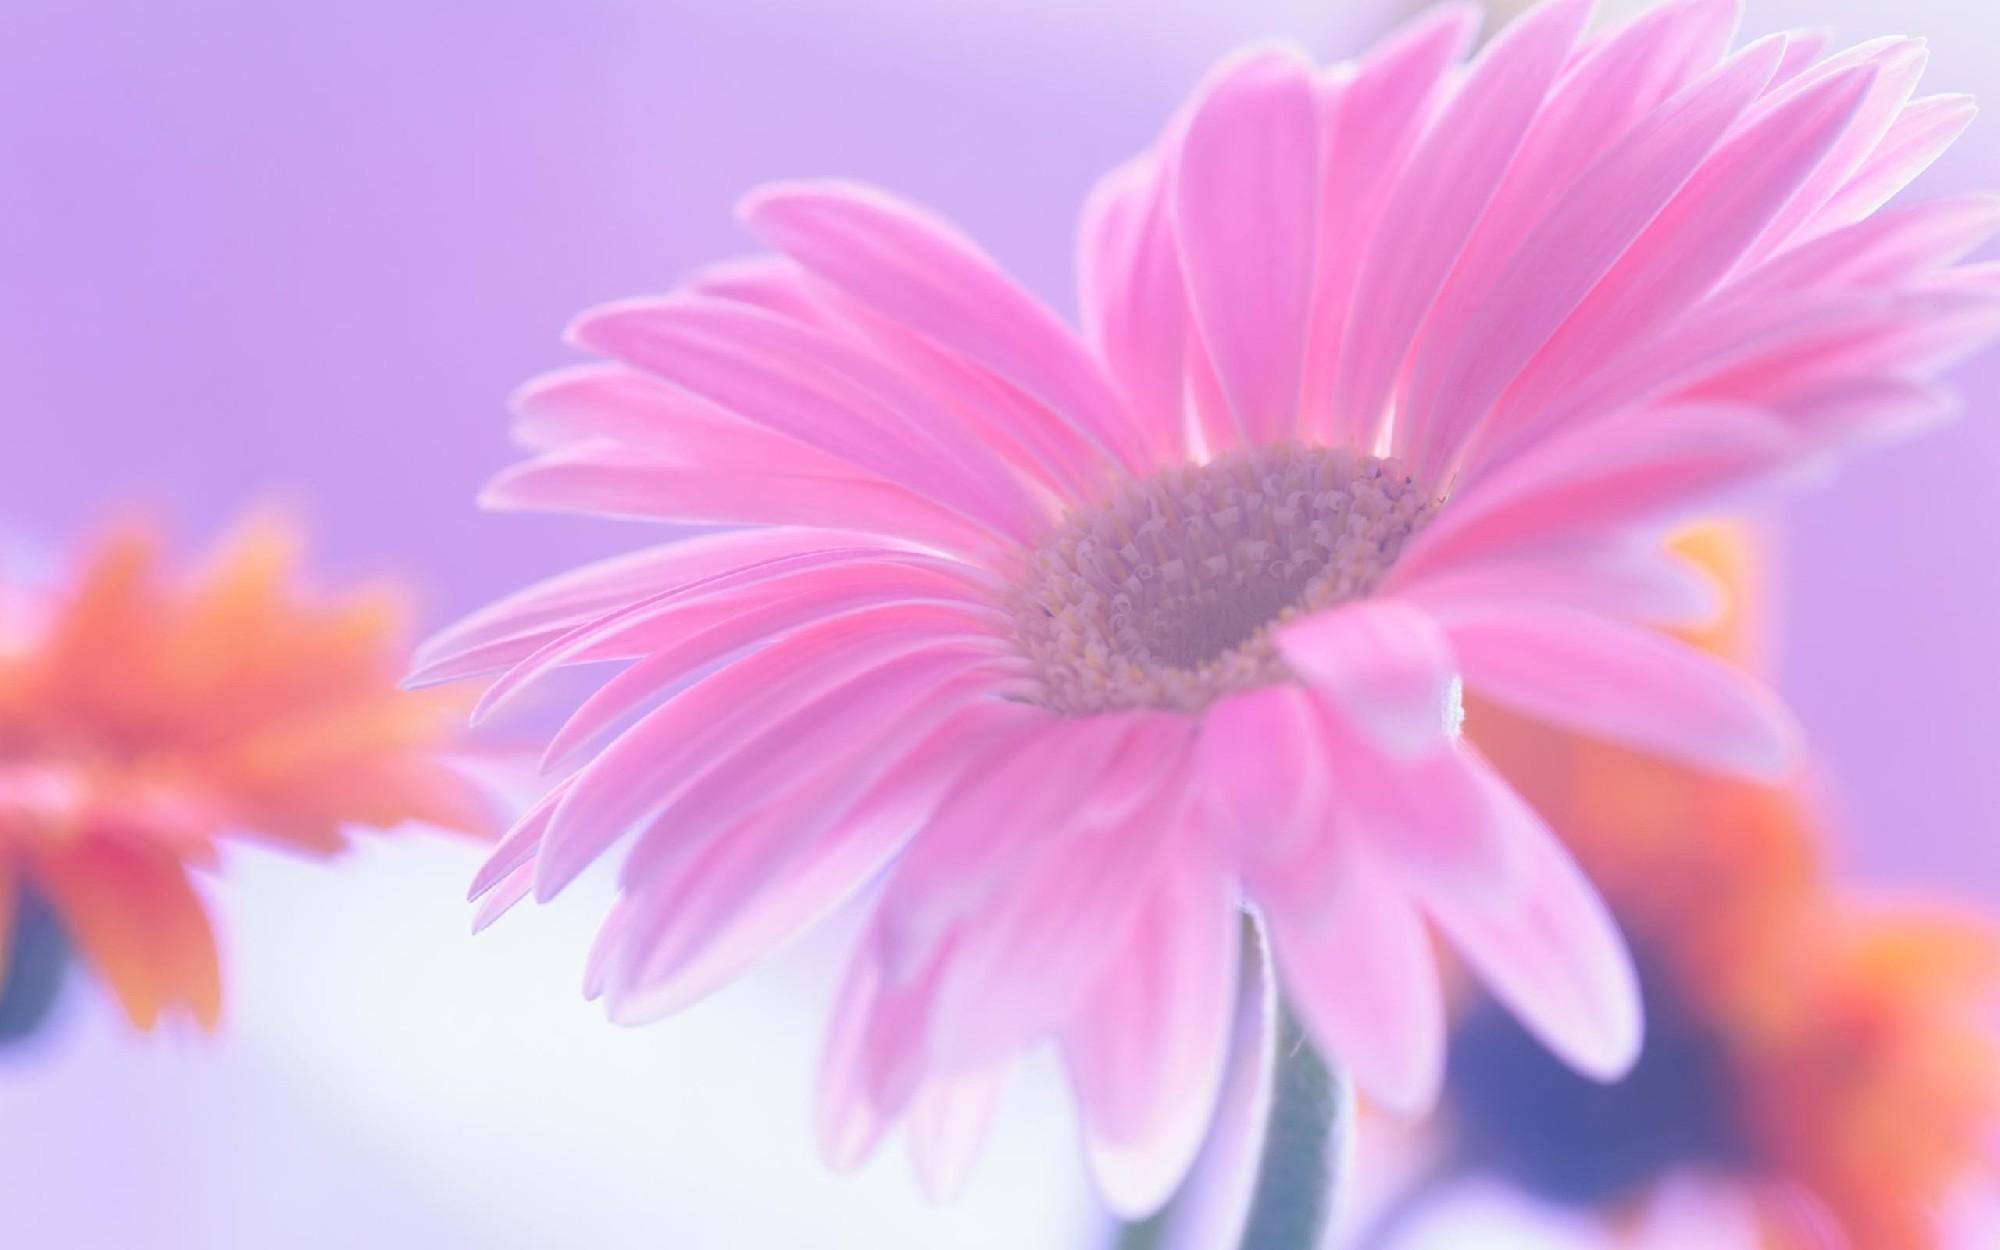 Pink Daisy Flower Wallpapers - Top Free Pink Daisy Flower Backgrounds ...